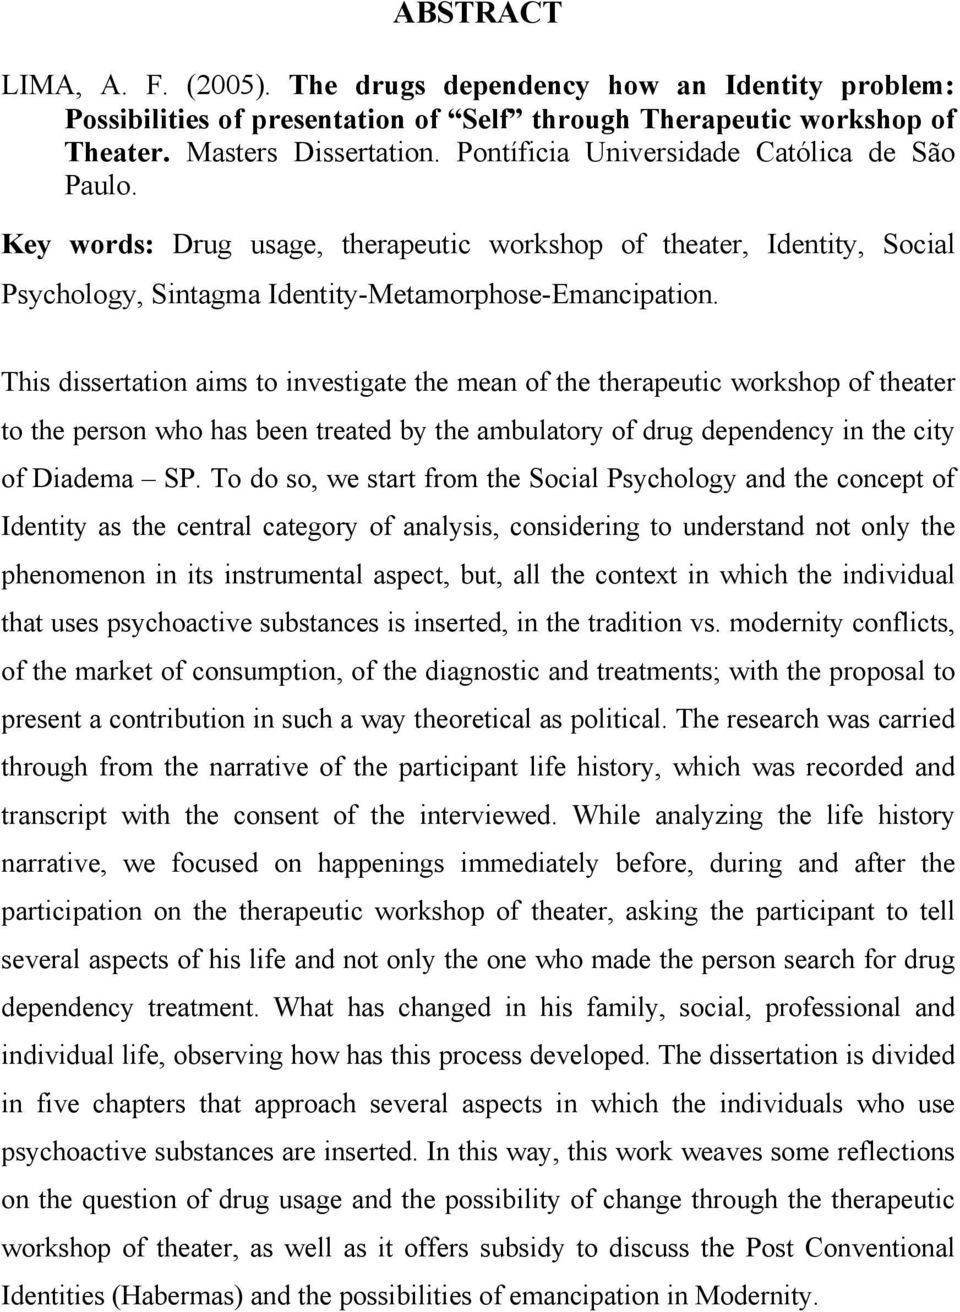 This dissertation aims to investigate the mean of the therapeutic workshop of theater to the person who has been treated by the ambulatory of drug dependency in the city of Diadema SP.